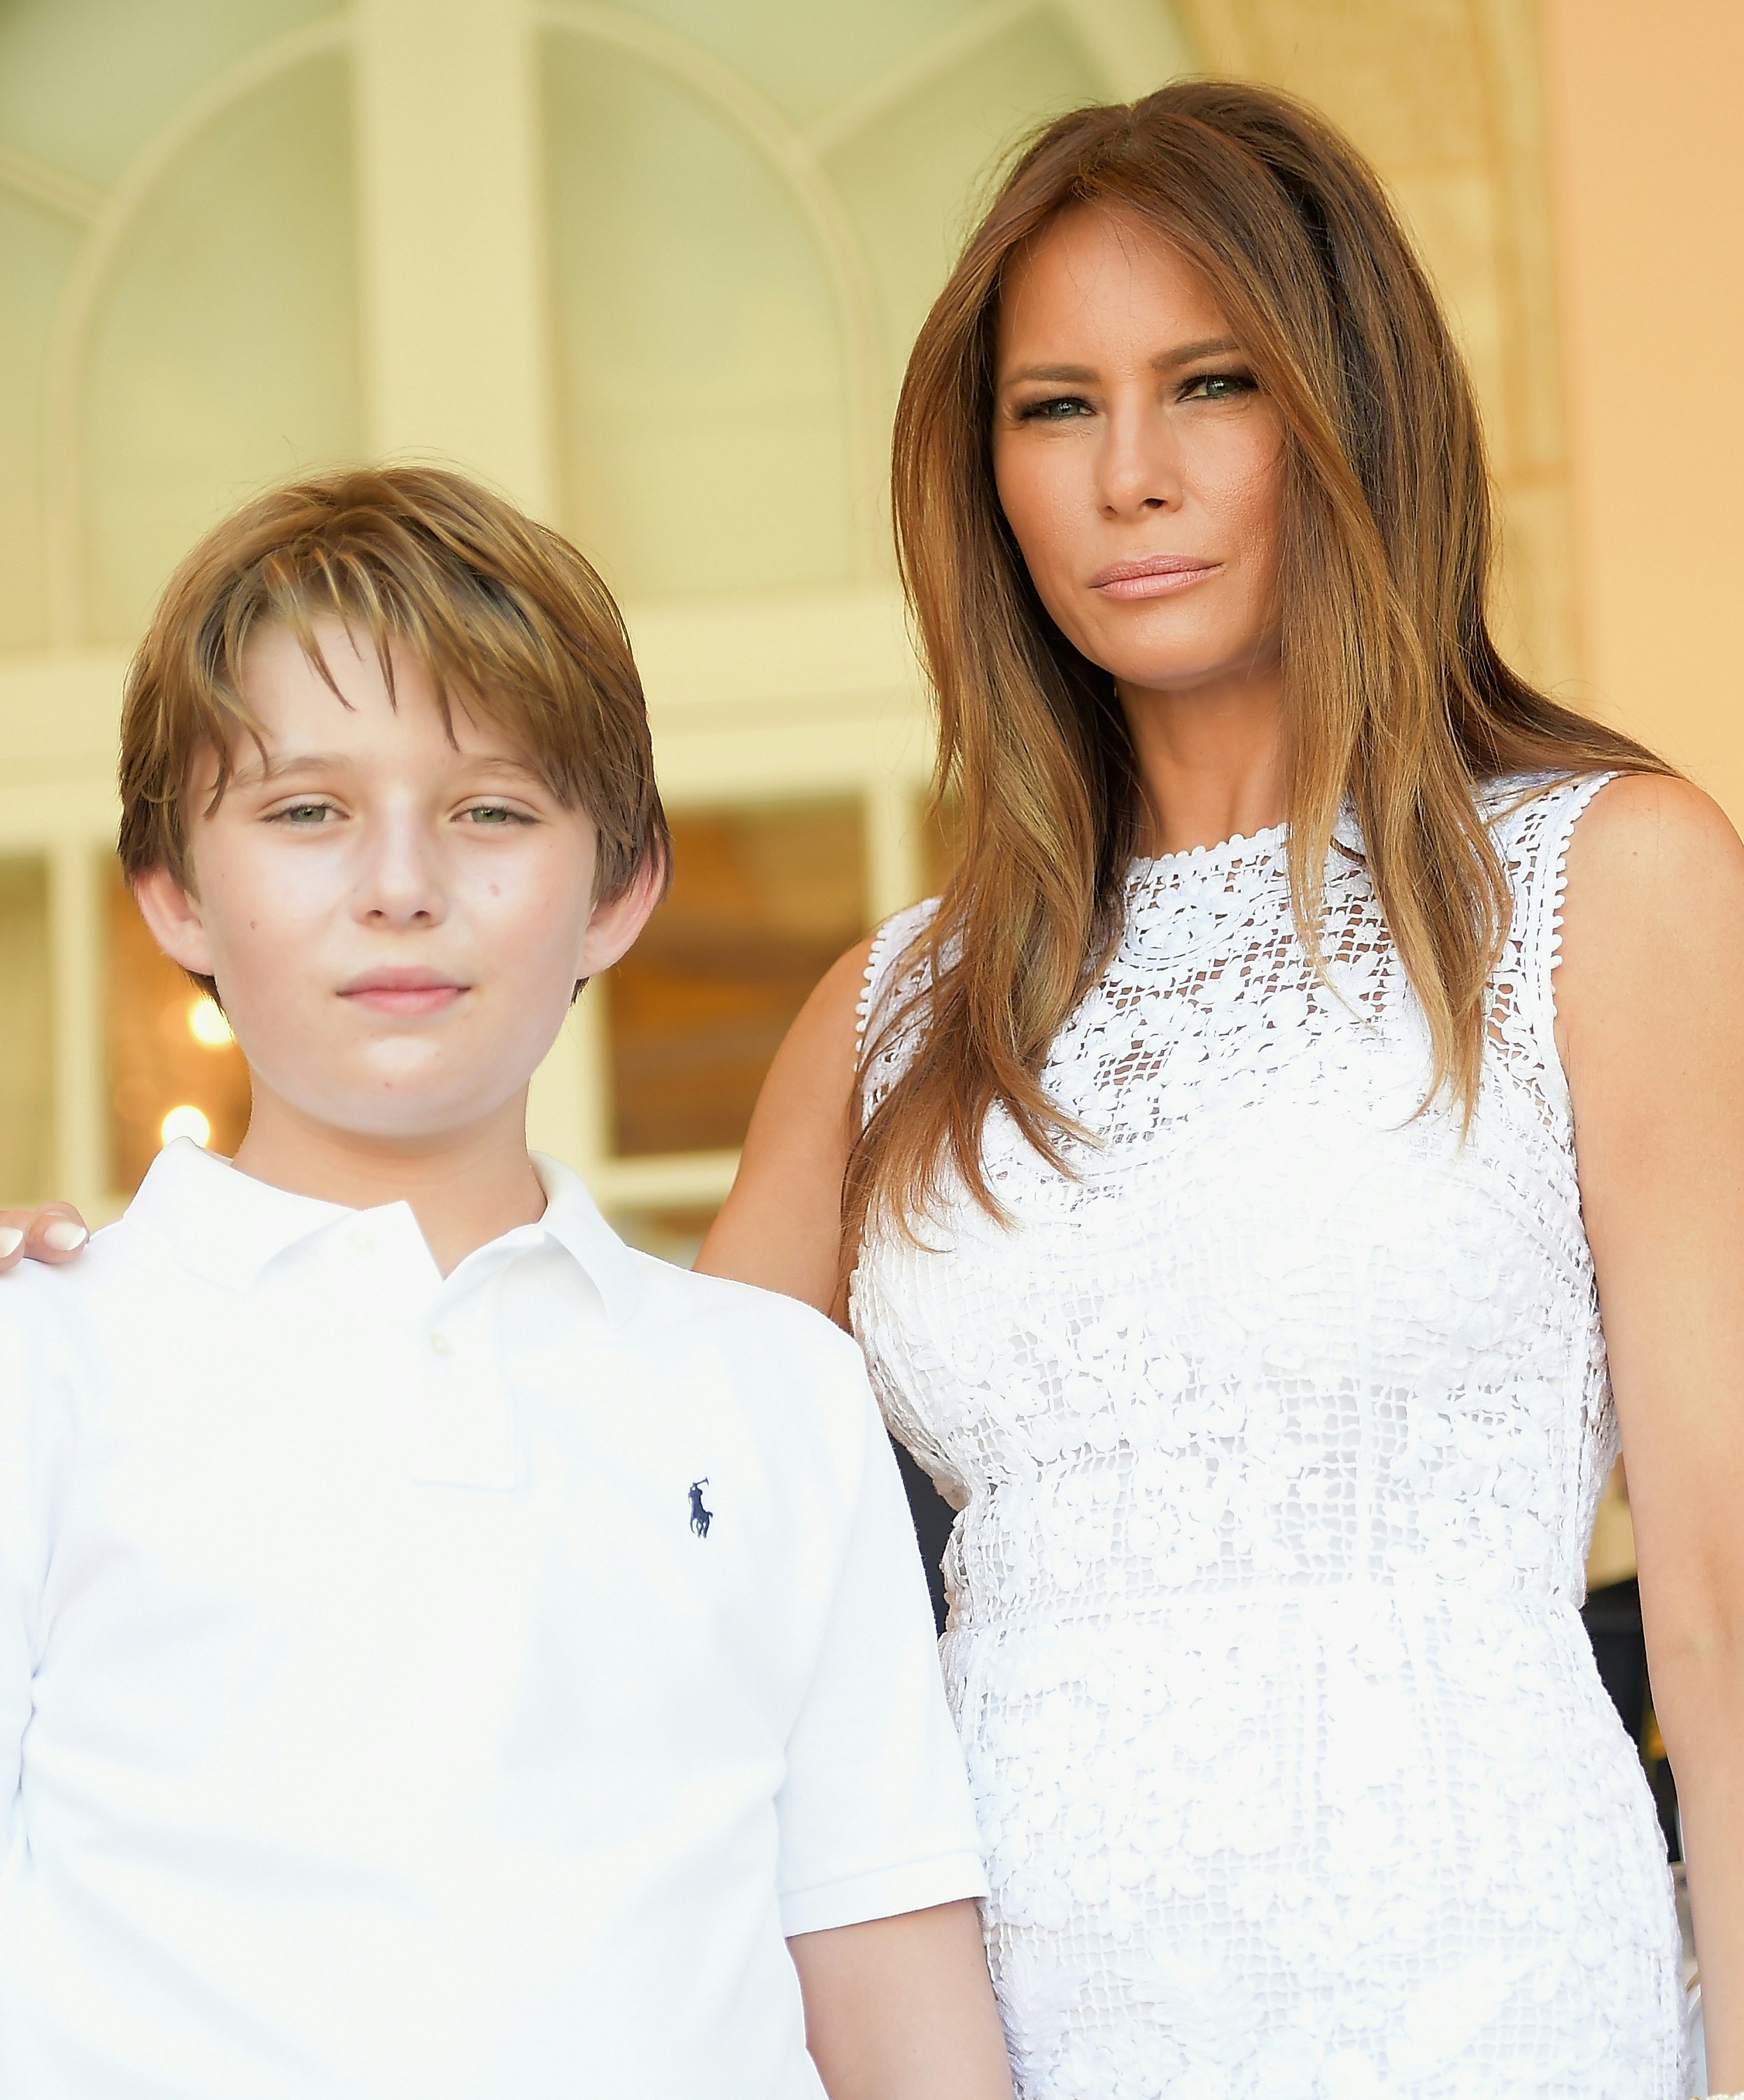 Photos Of Barron Trump Show That The 10 Year Old Is Already Living